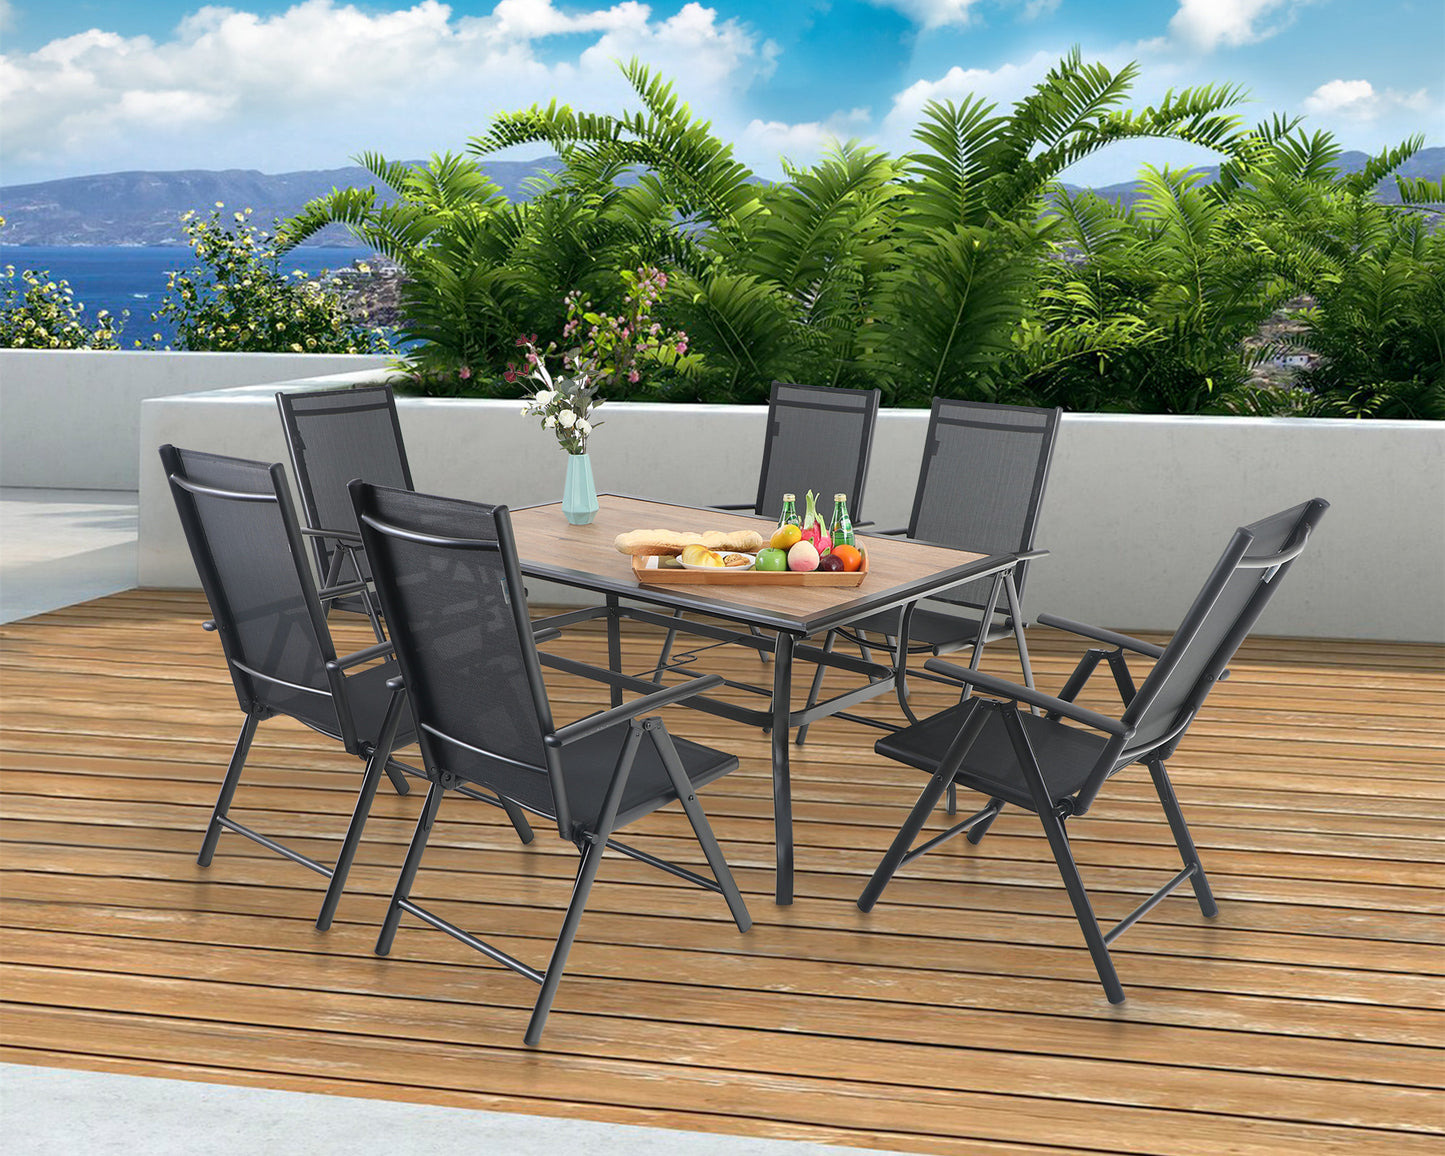 Sophia&William 7 Pcs Patio Dining Set Metal Table and Chairs Set for 6 People - Black